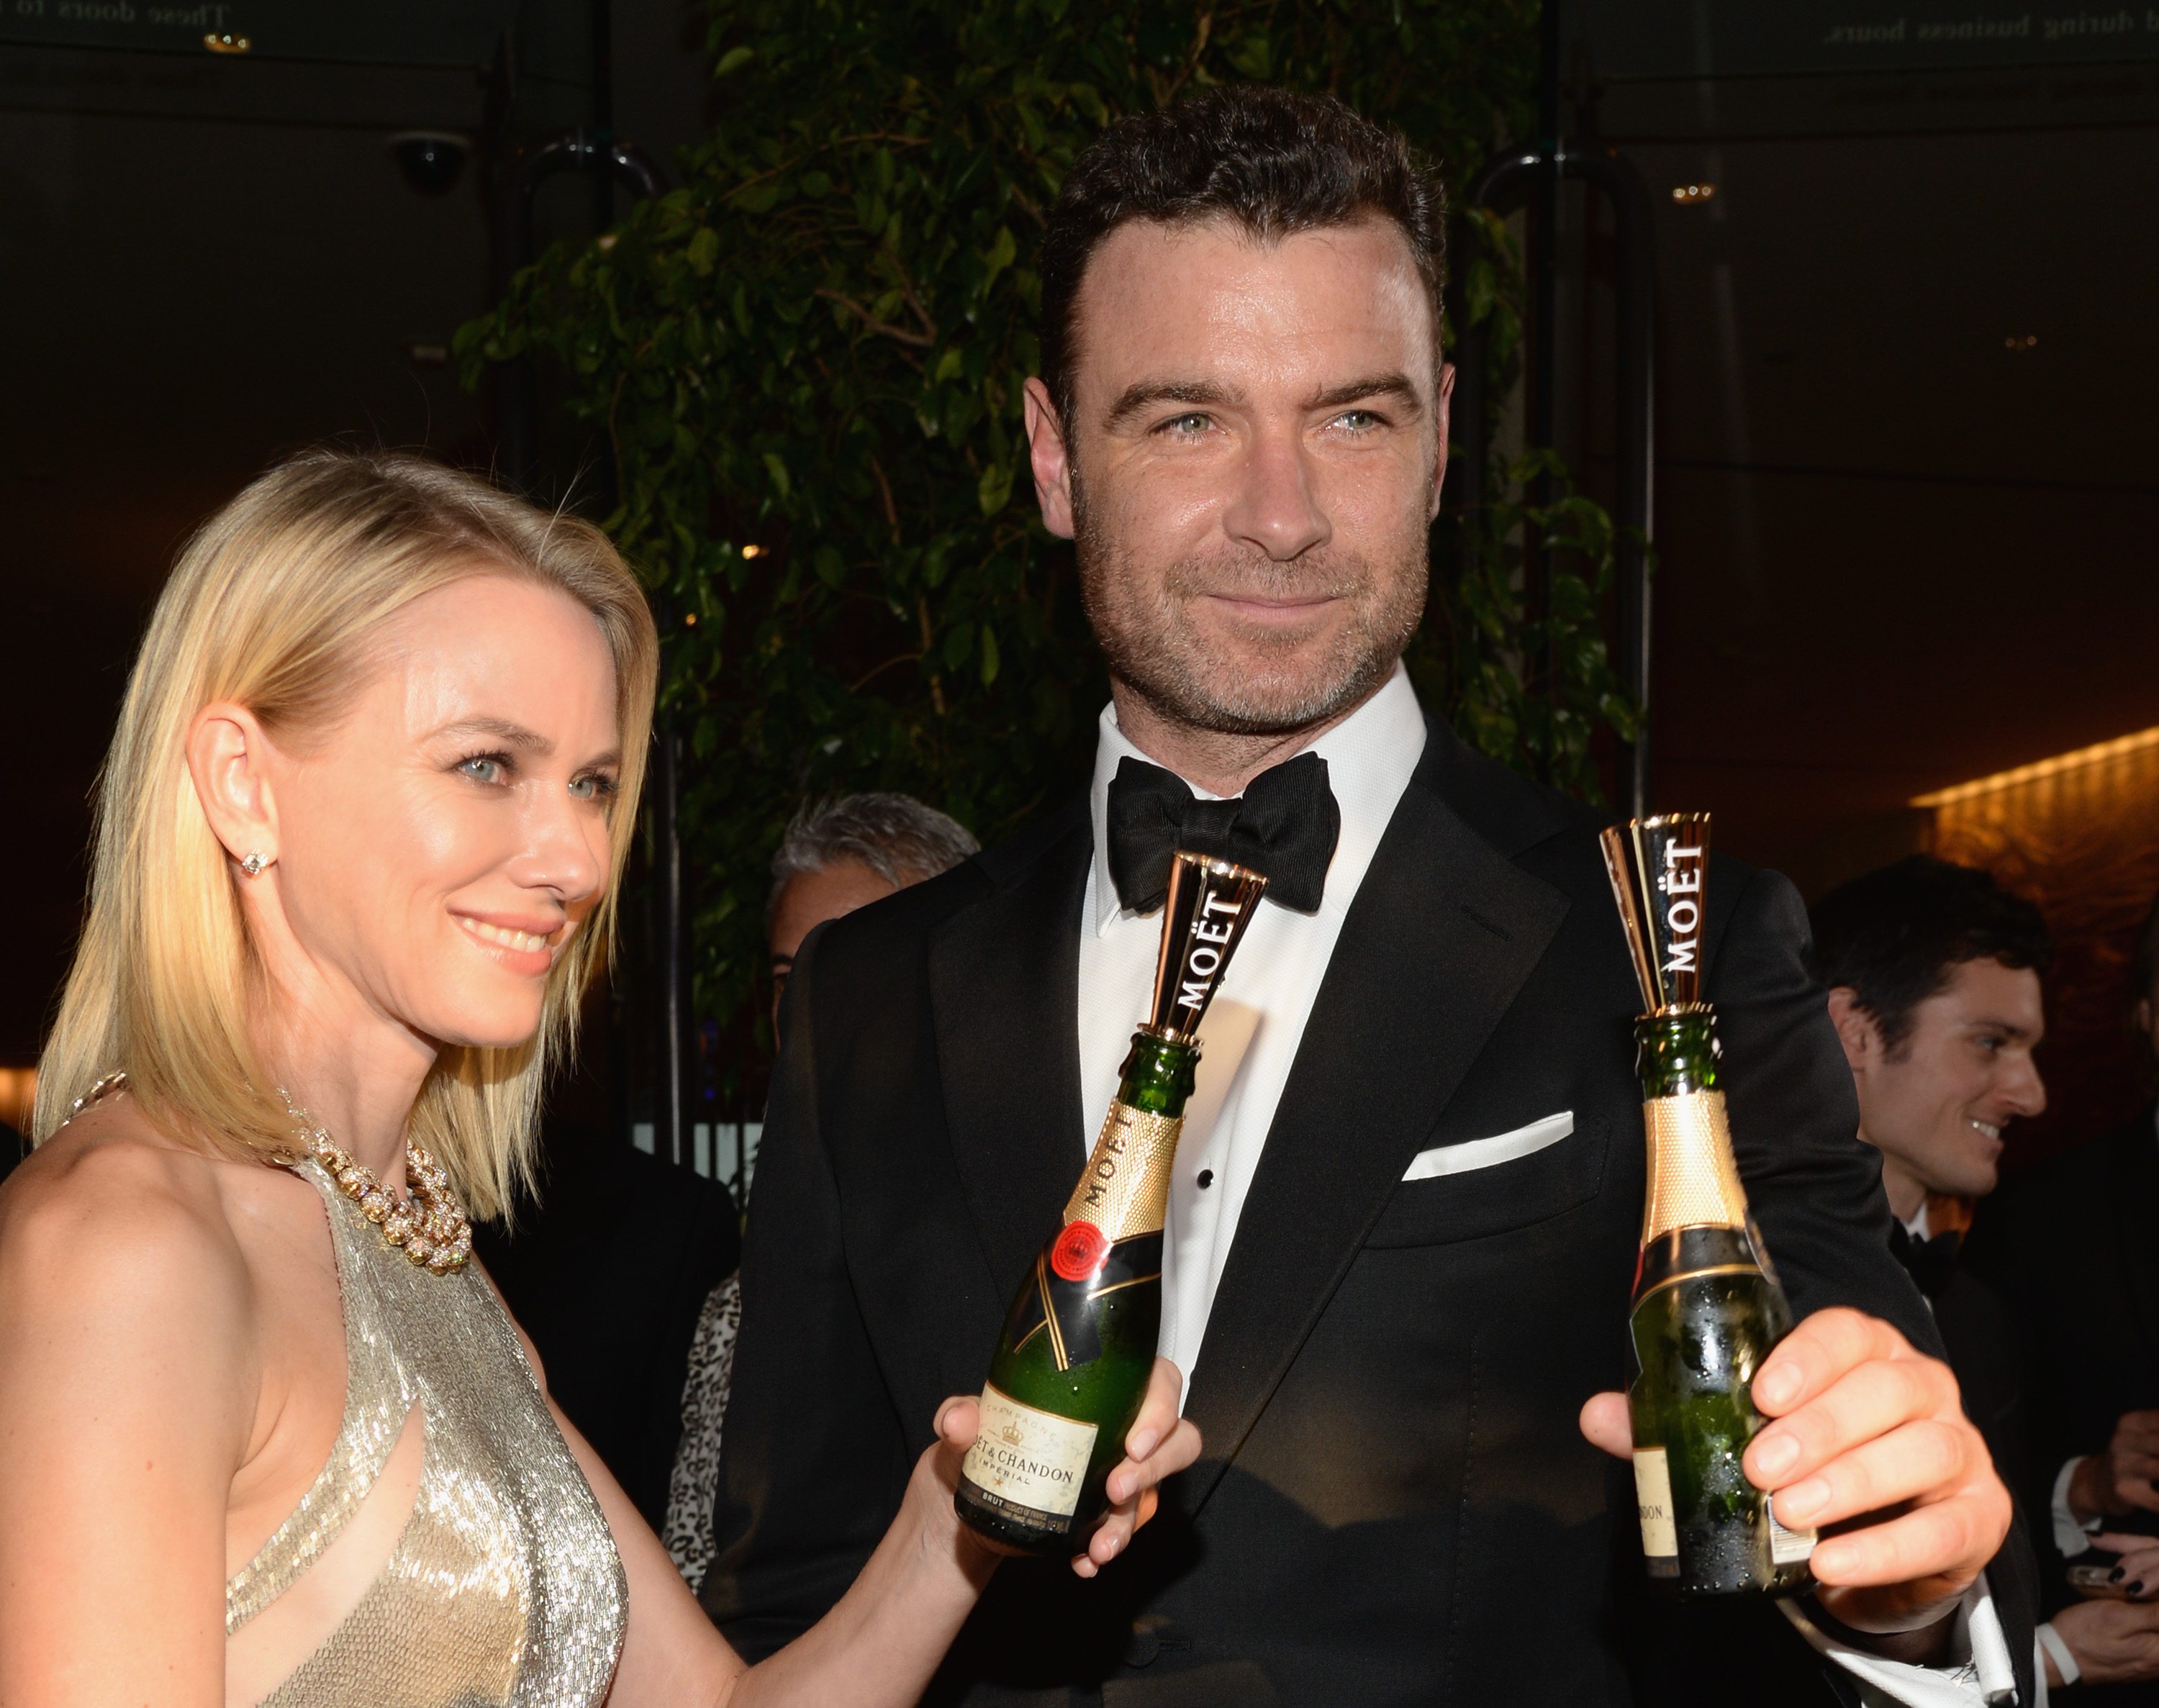 Actors Naomi Watts (L) and Liev Schreiber attend the 71st Annual Golden Globe Awards with Moet & Chandon held at the Beverly Hilton Hotel on January 12, 2014 in Los Angeles, California.  (Photo by Michael Kovac/Getty Images for Moet & Chandon)